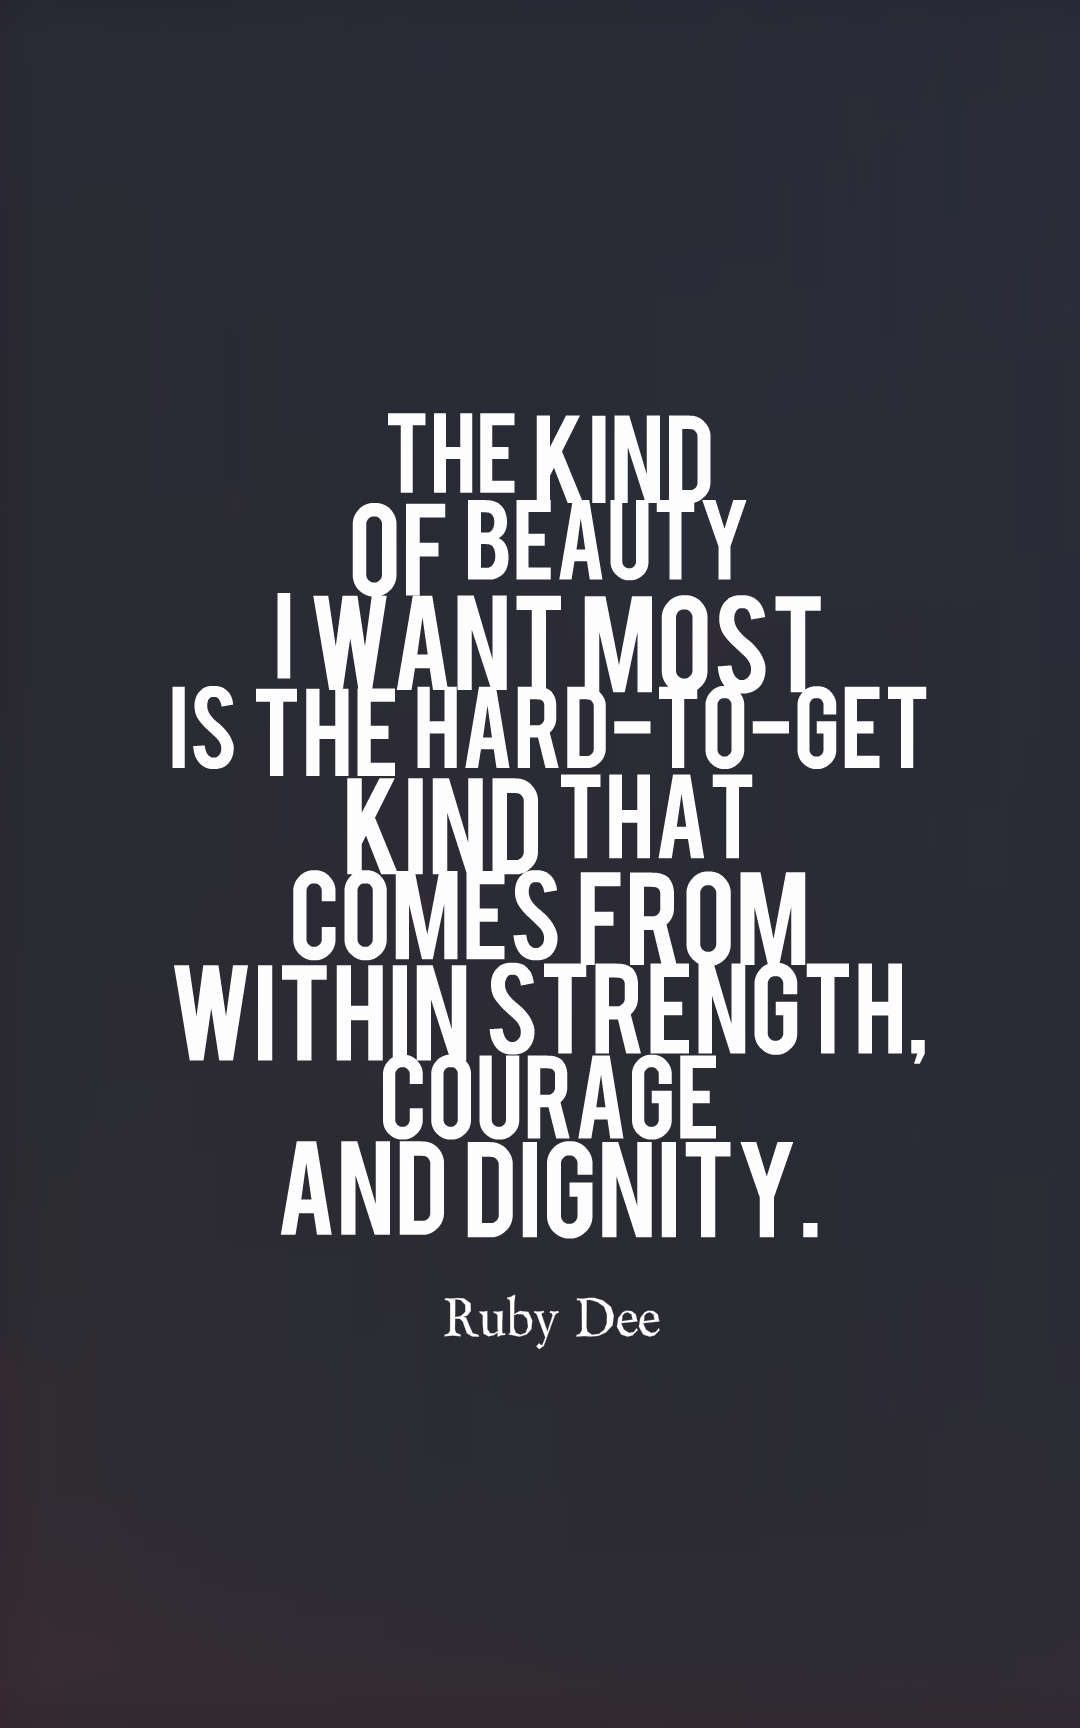 The kind of beauty I want most is the hard-to-get kind that comes from within strength, courage and dignity.